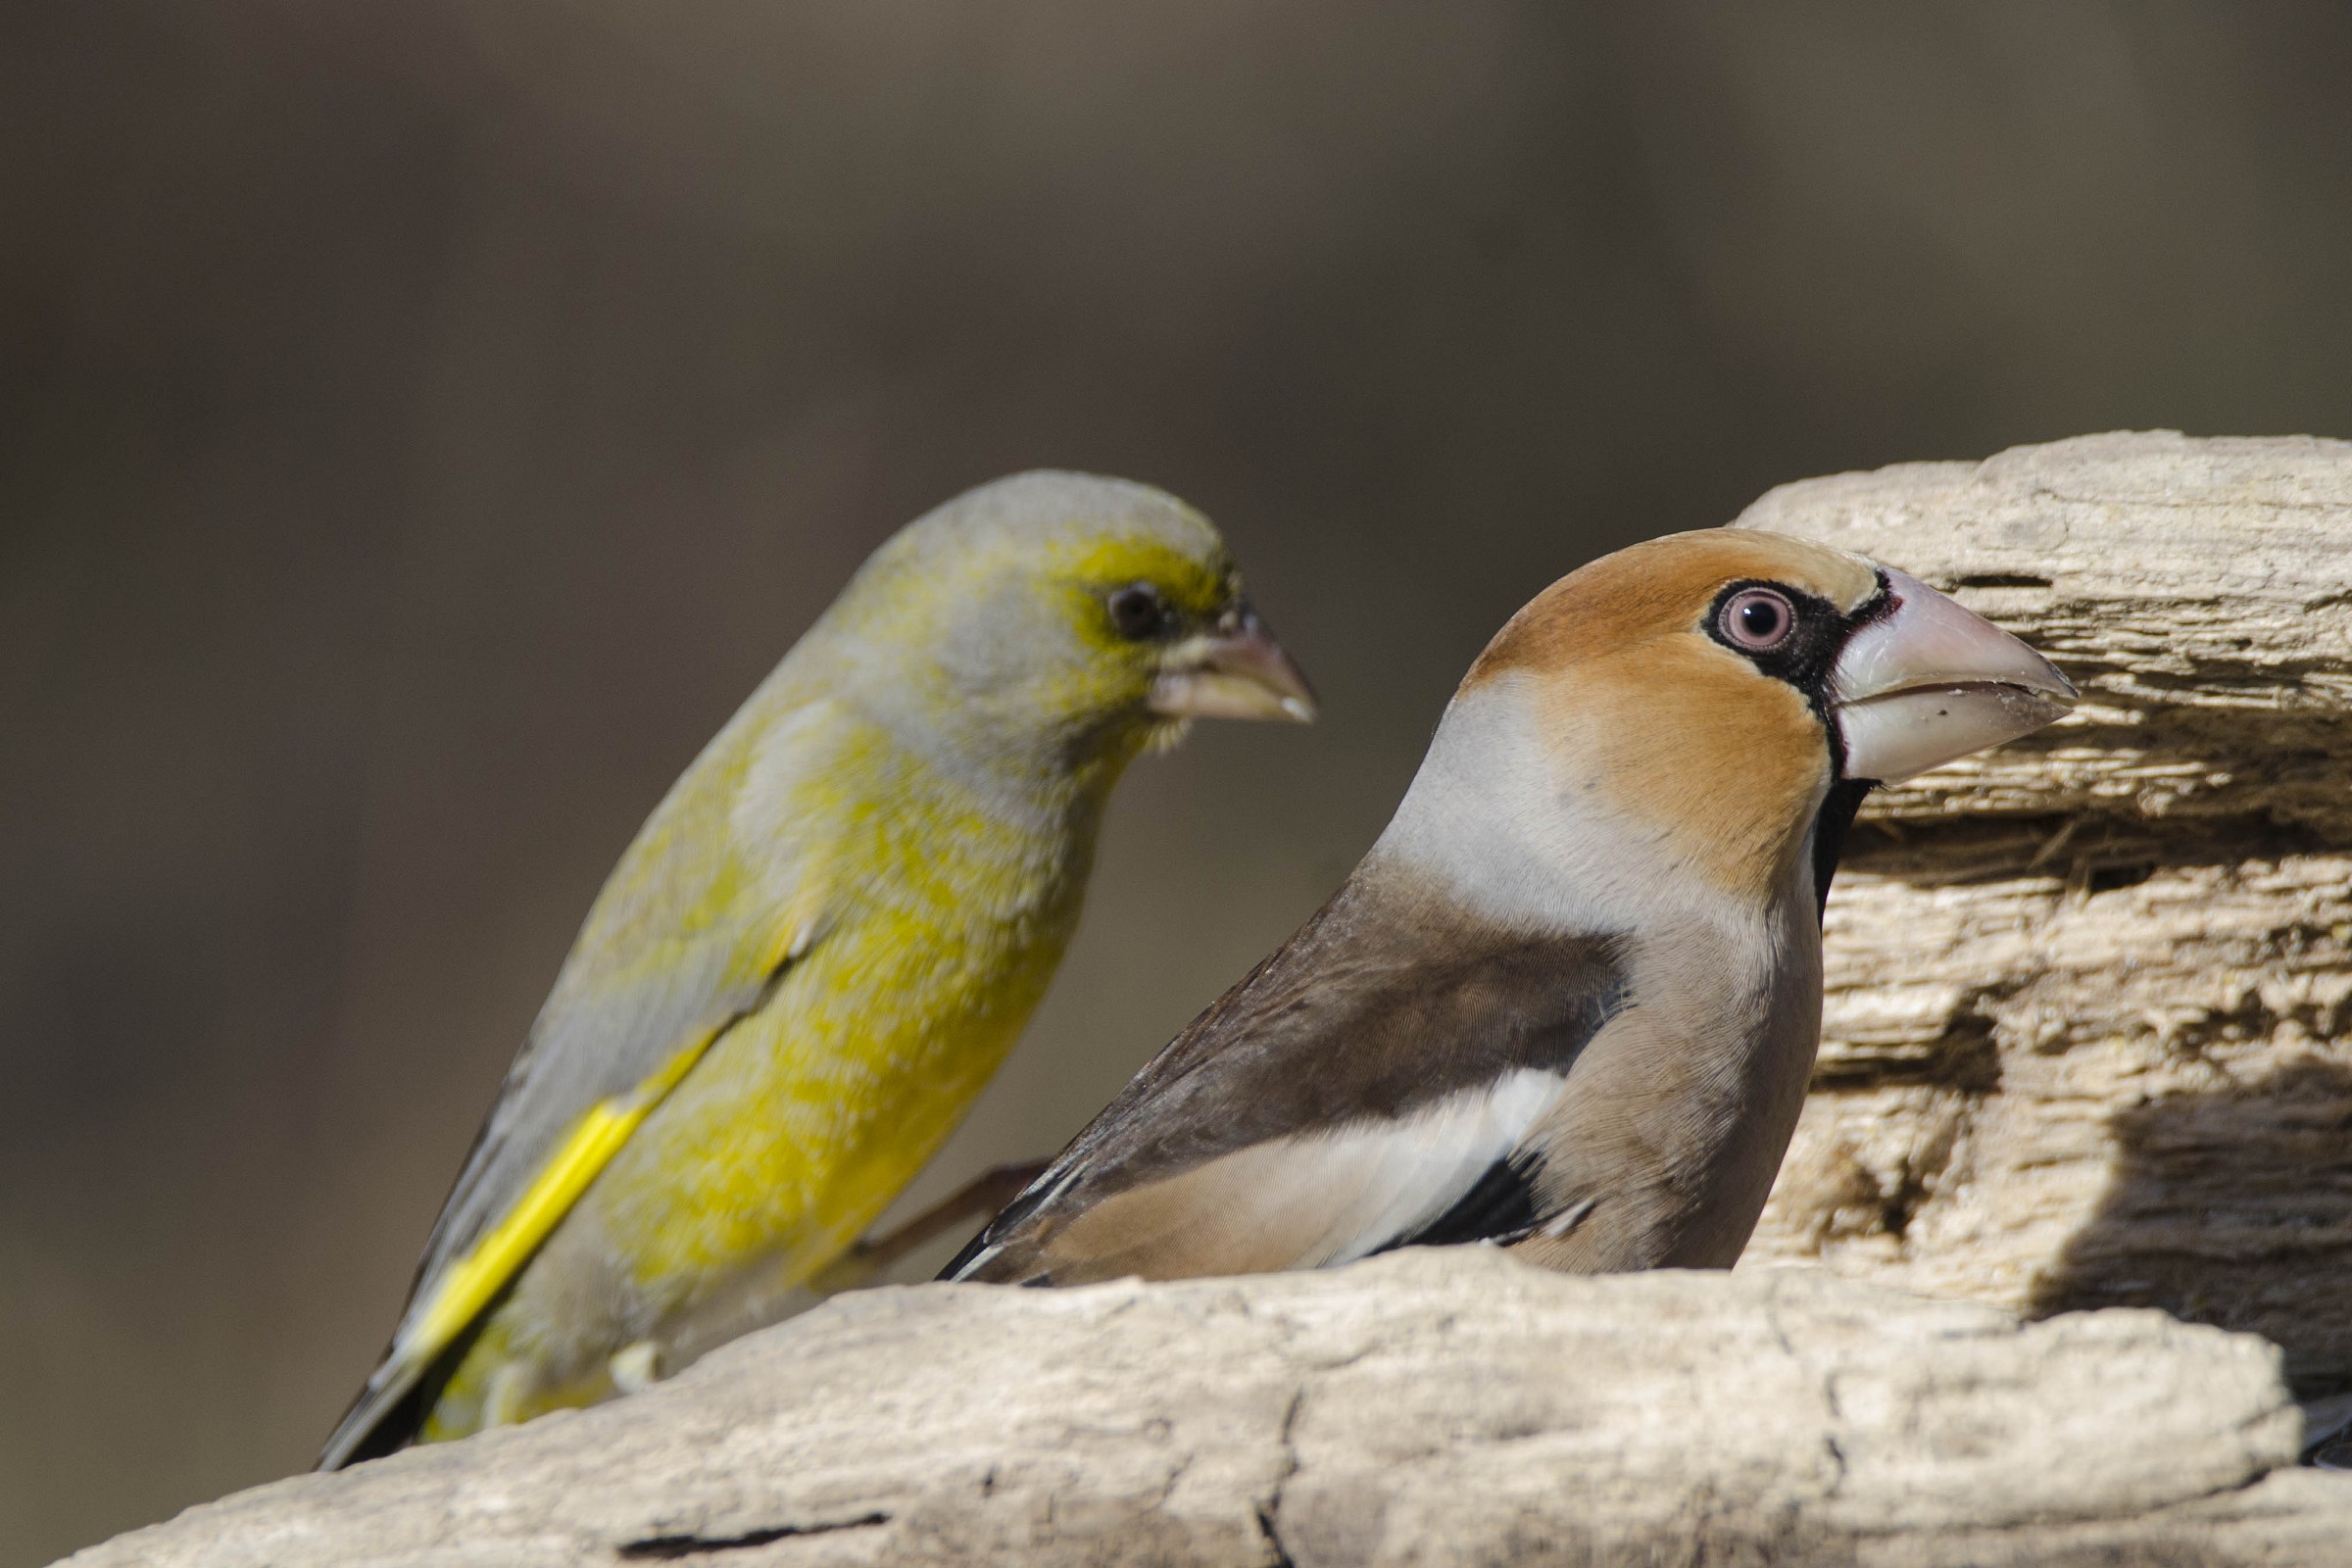 Hawfinch and greenfinch...